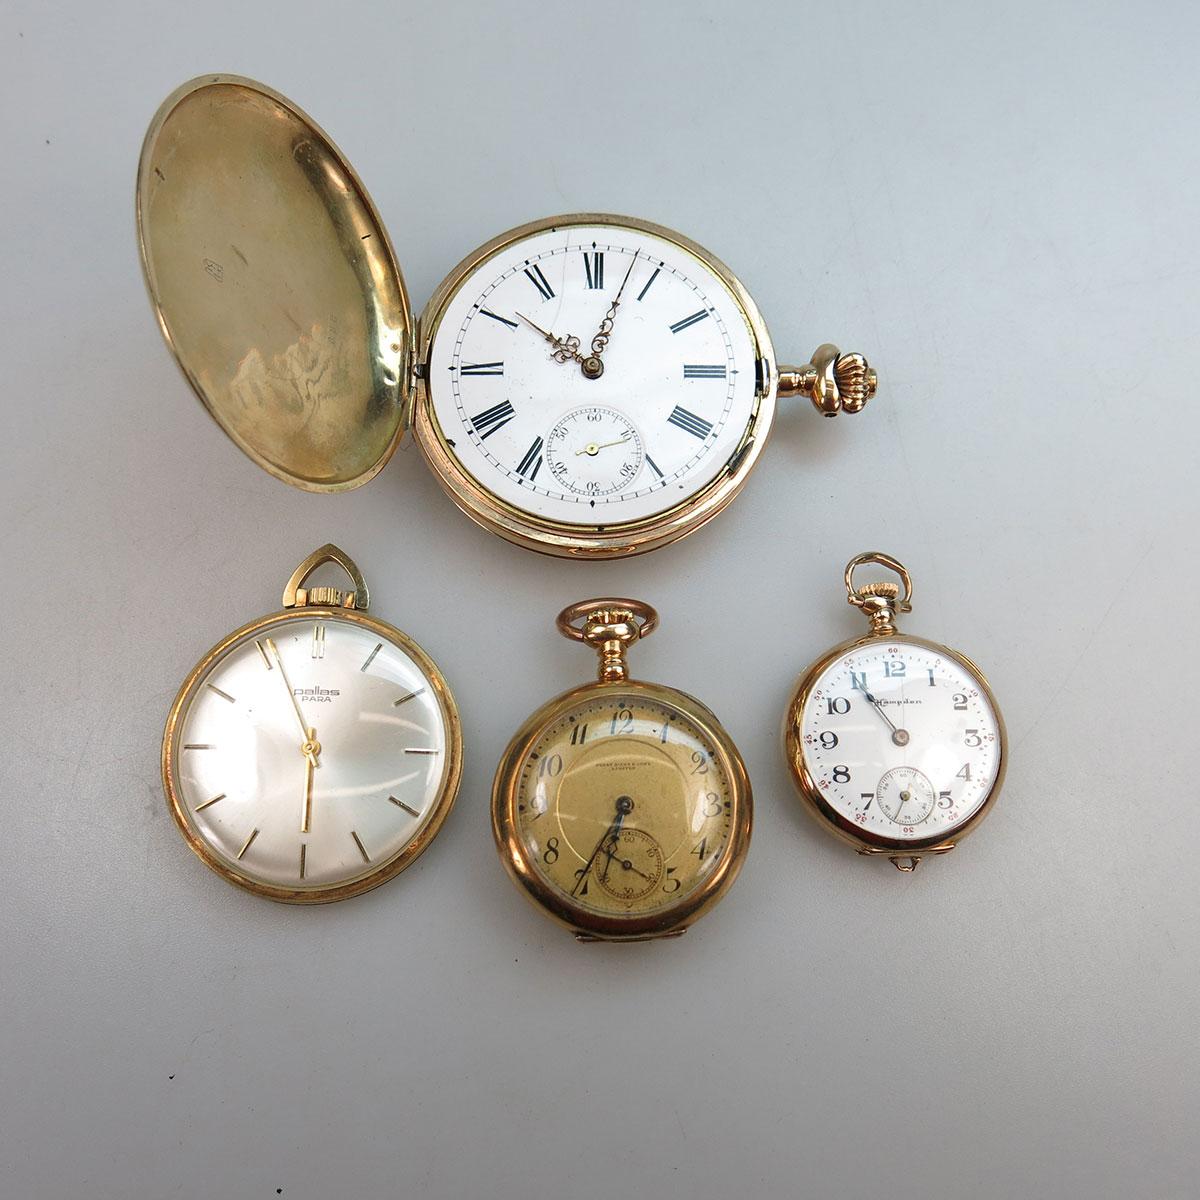 4 Pocket Watches In Gold Cases